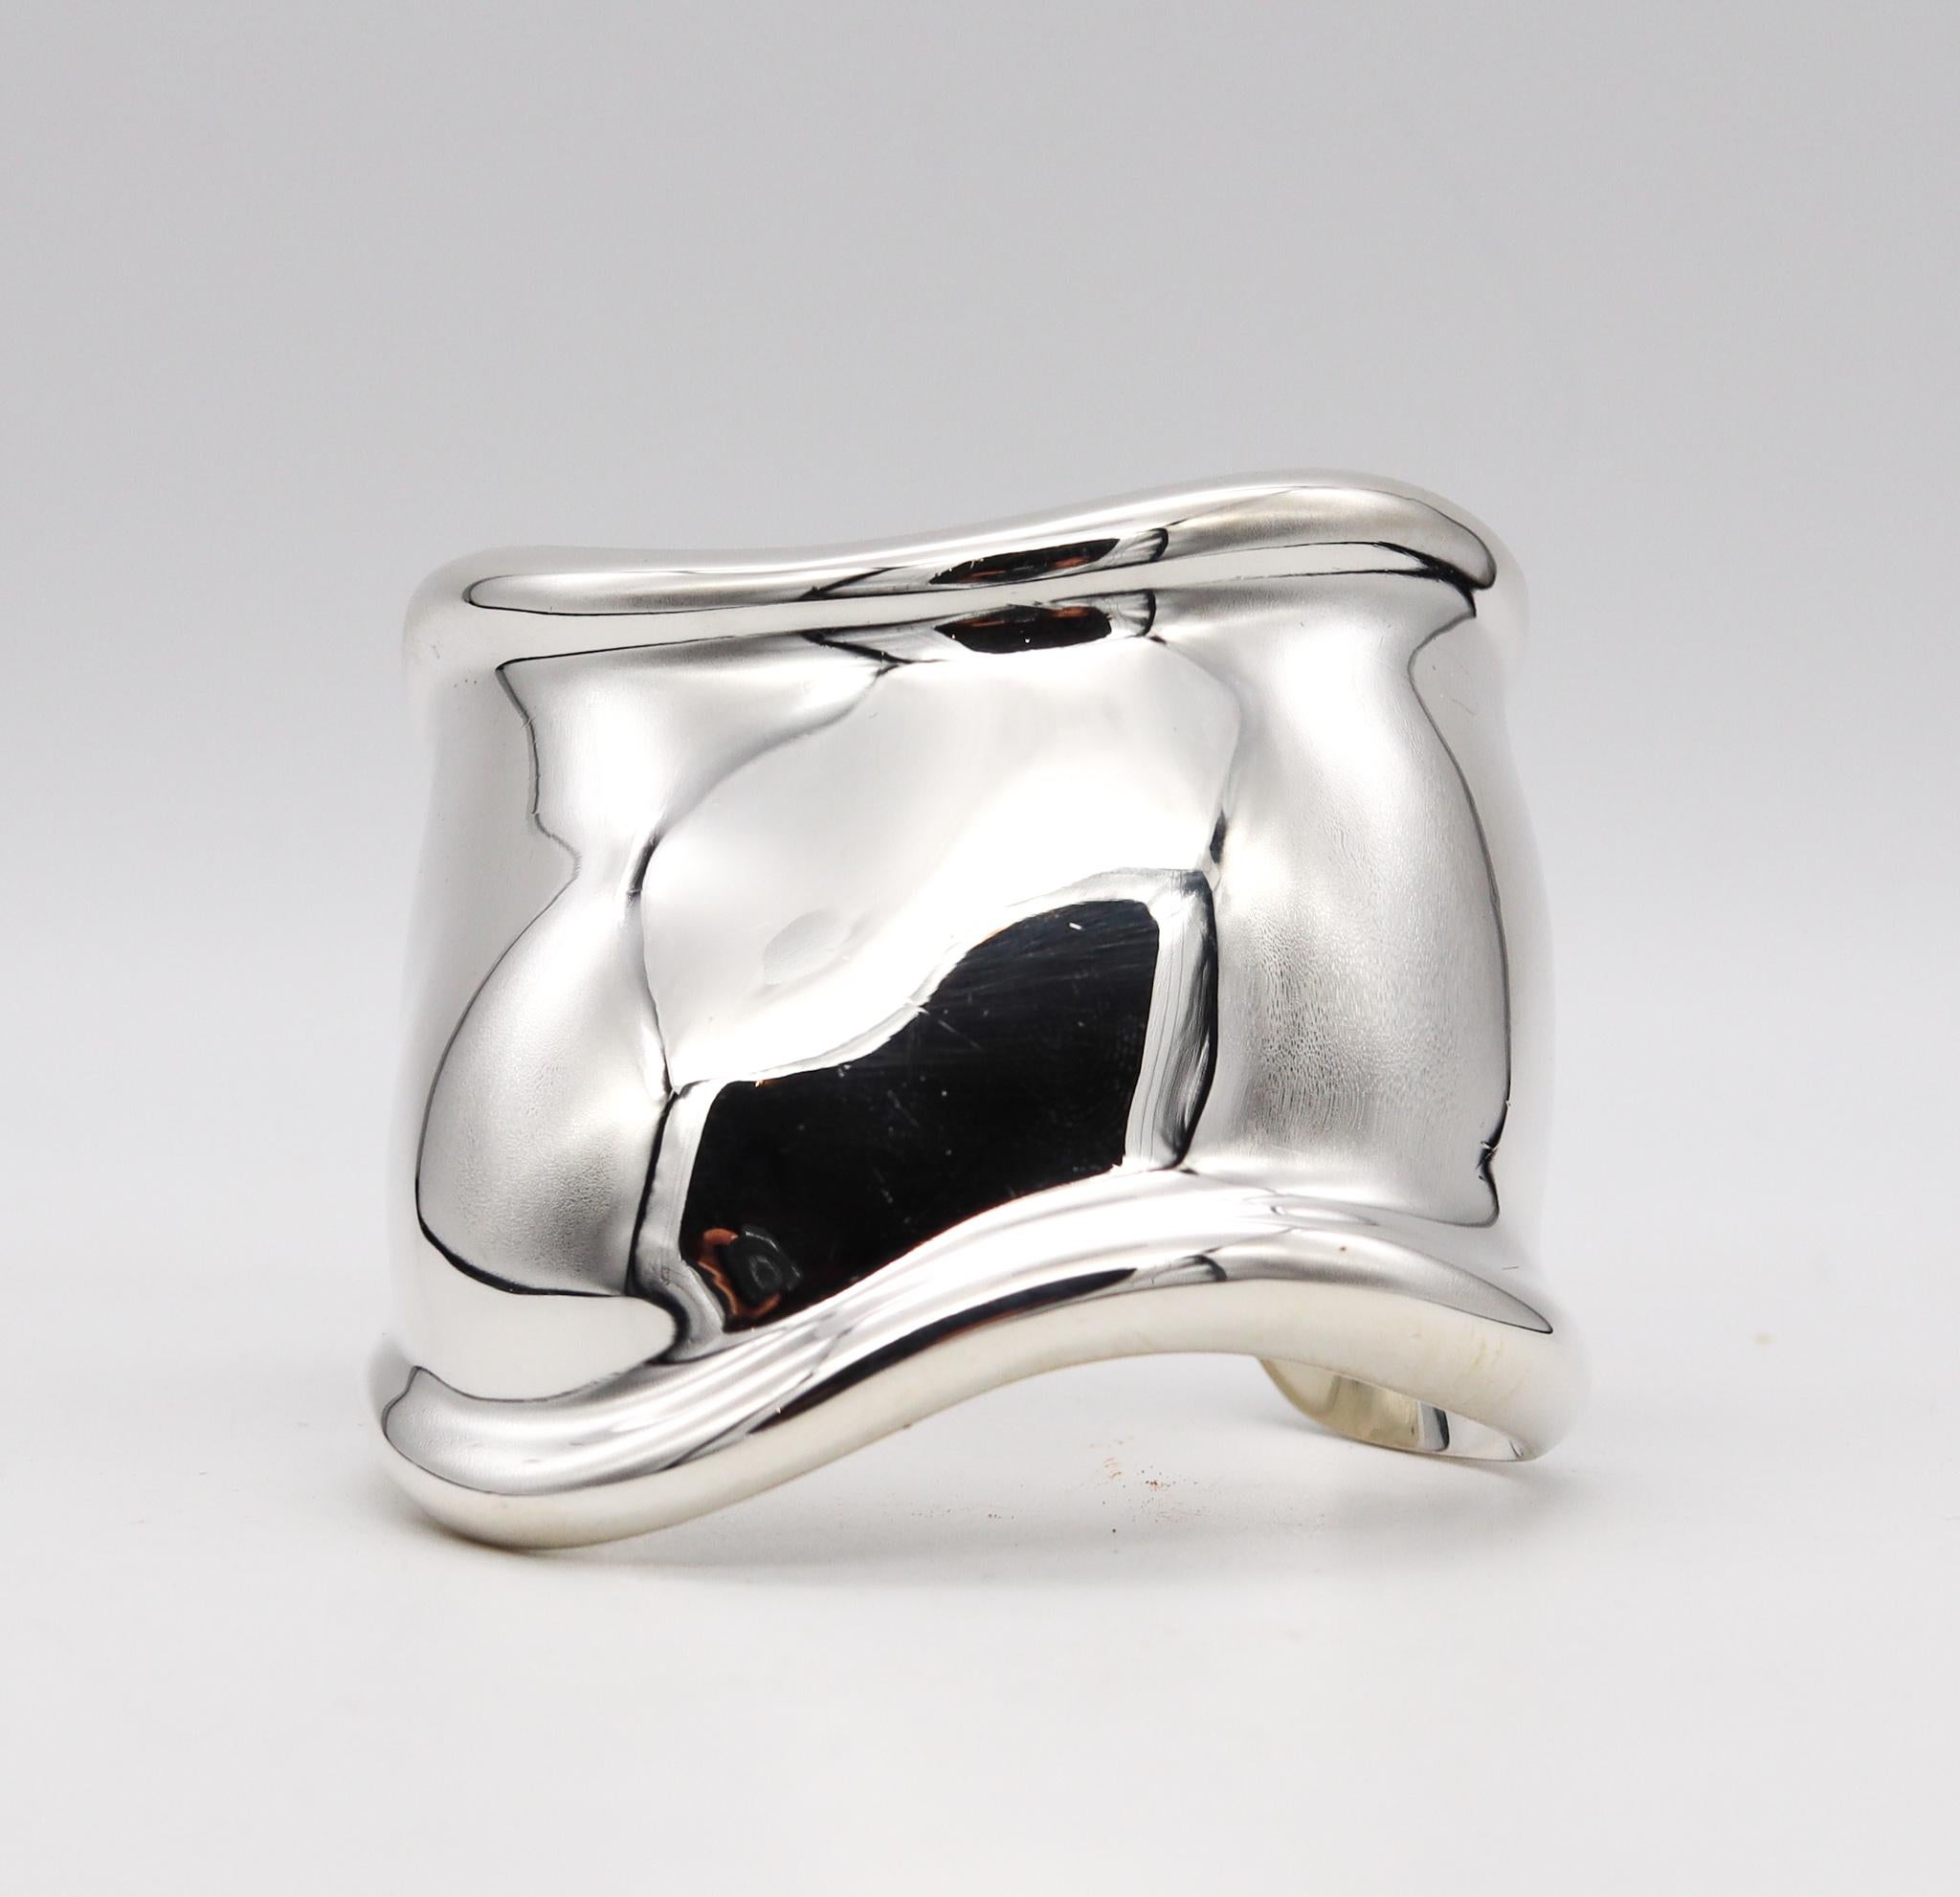 Vintage Bone cuff designed by Elsa Peretti (1940-2021) for Tiffany & Co.

This sculptural cuff is one of the most iconic designs, created by Peretti for the Tiffany studios and from the 20th century jewelry designs. This model was first created in